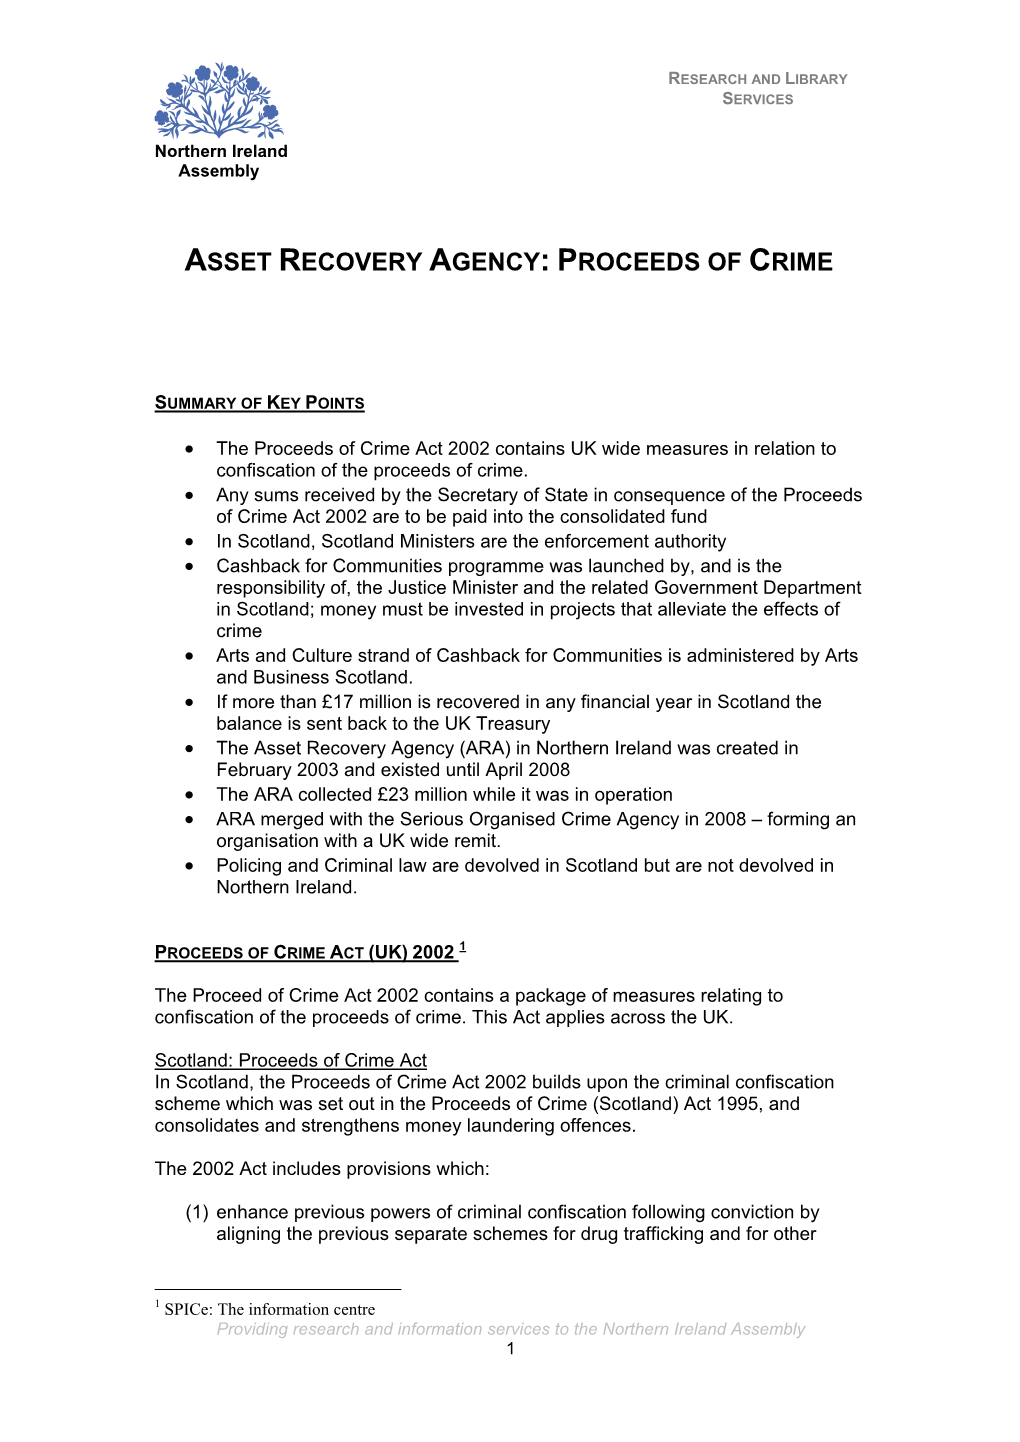 Asset Recovery Agency: Proceeds of Crime